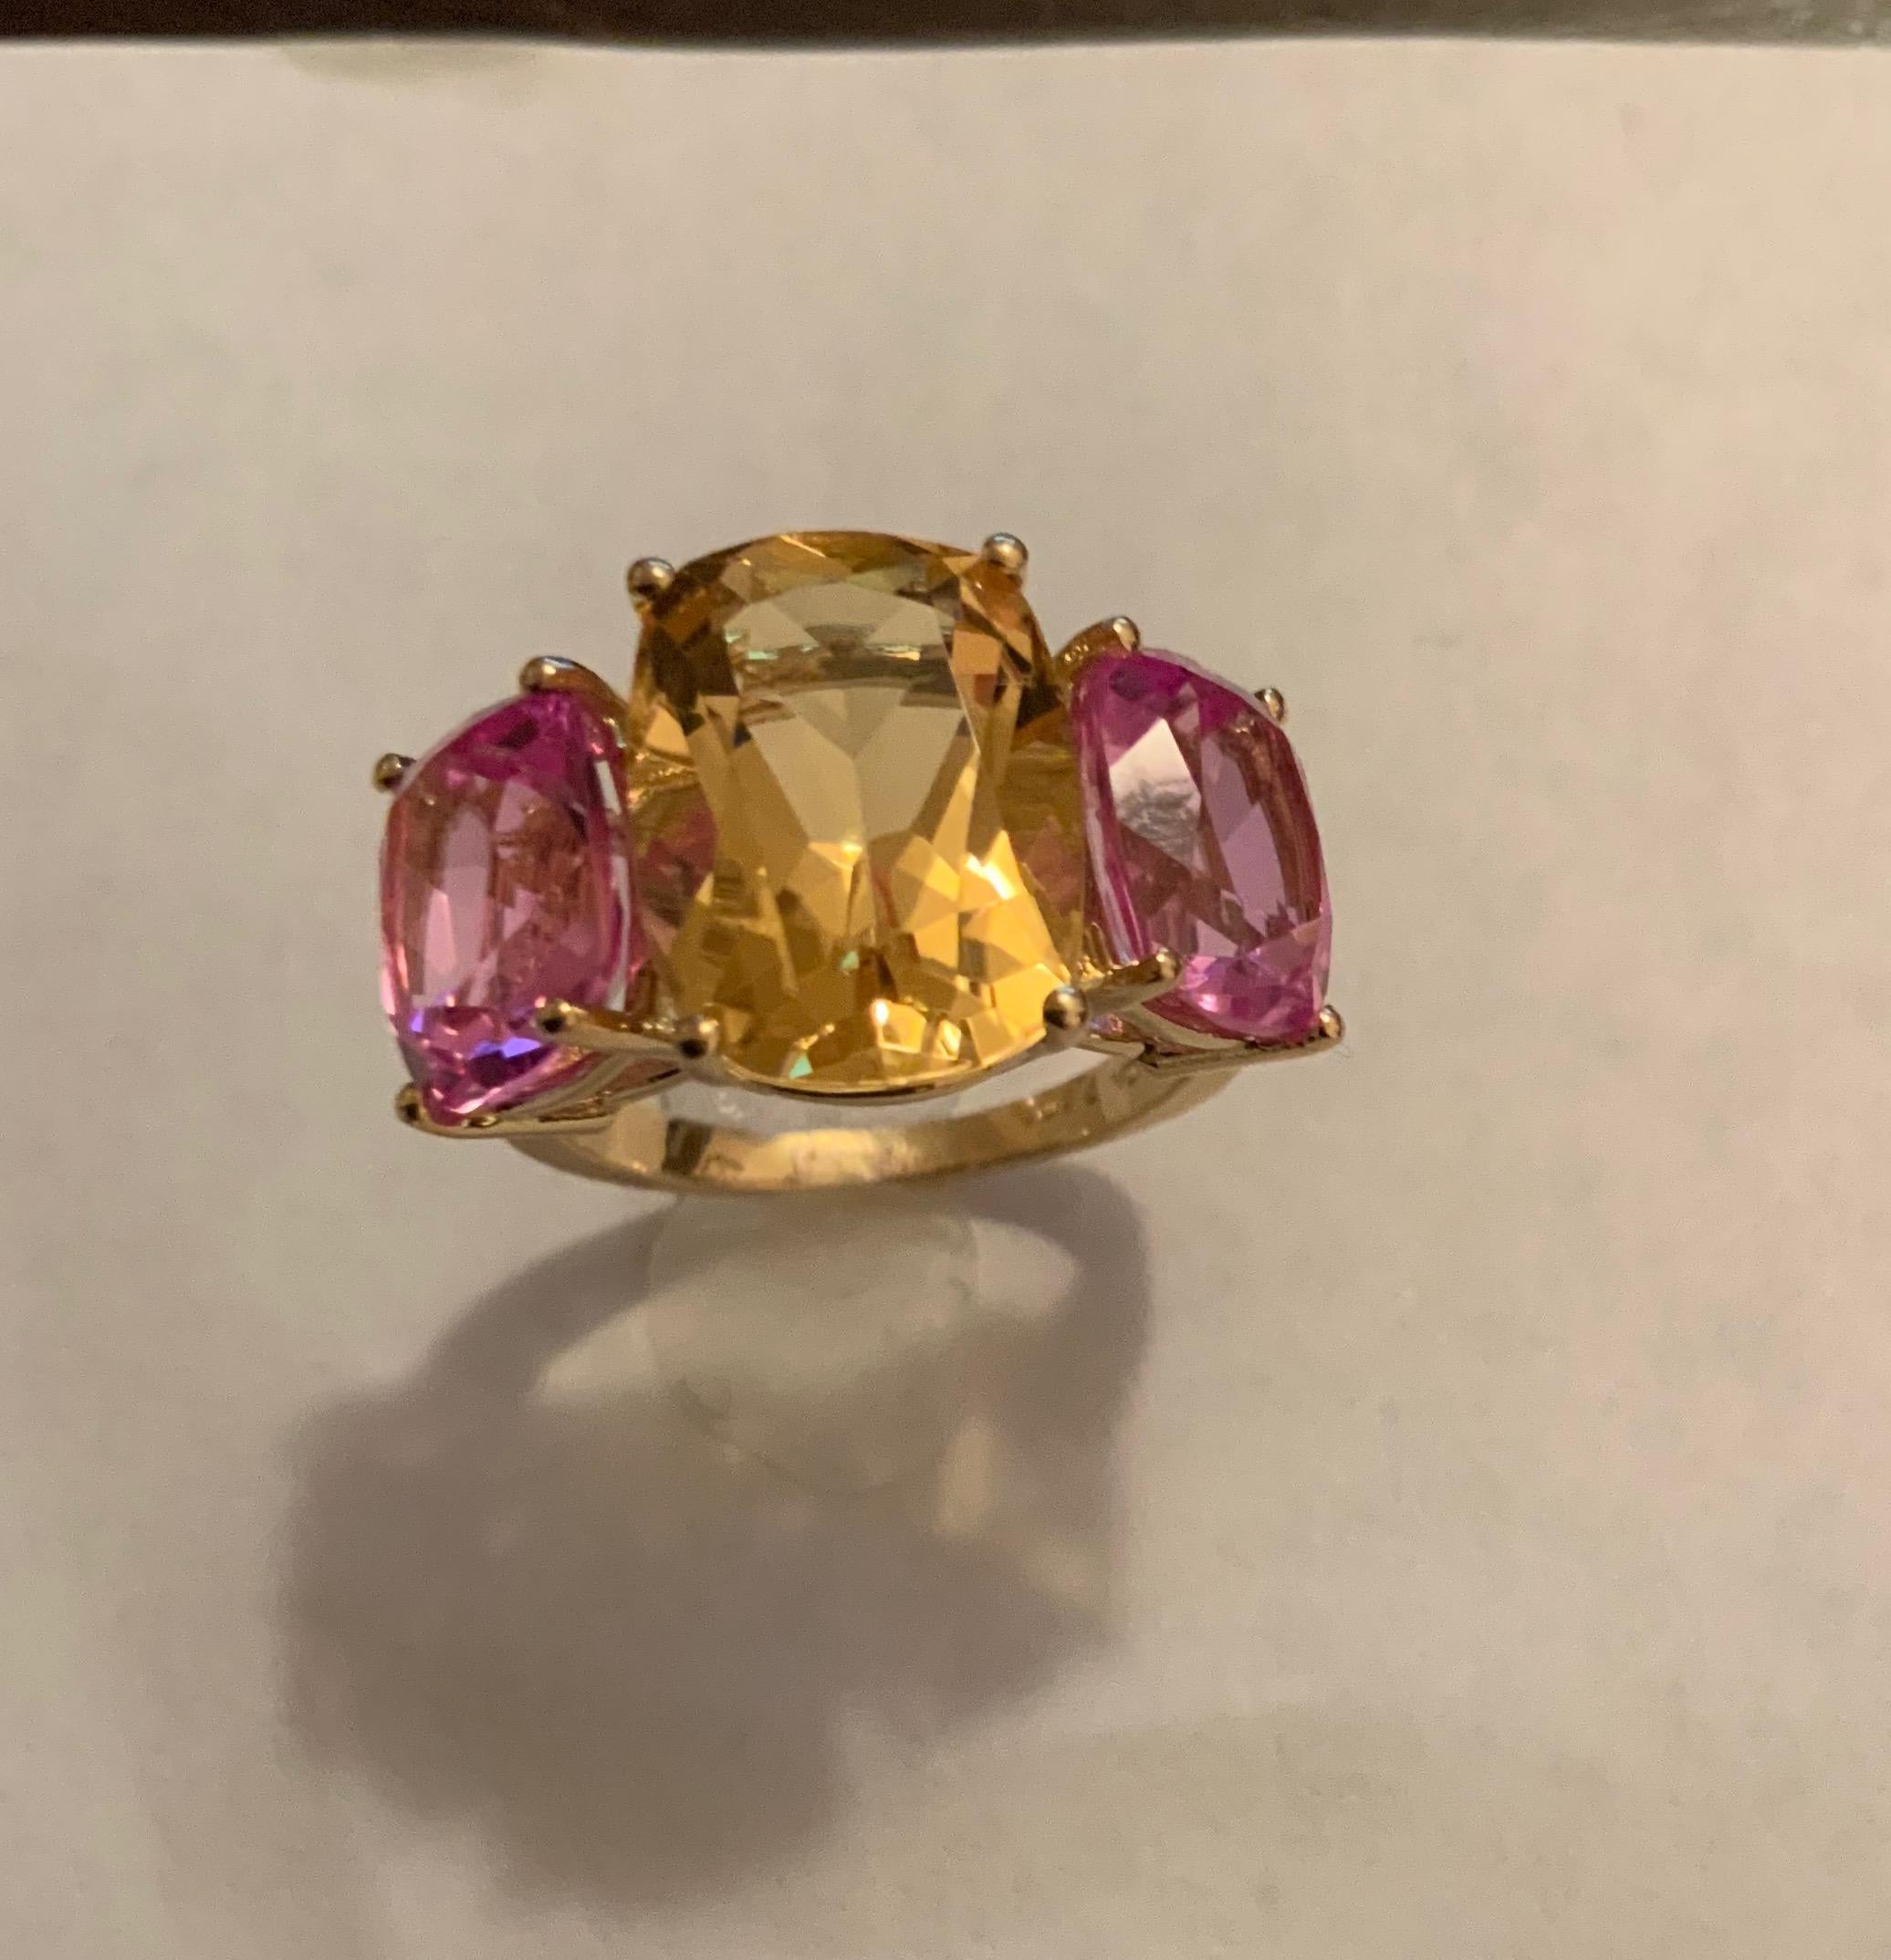 18kt Yellow Gold Three Stone faceted Cushion Cut Ring with center Citrine and Pink Topaz finished with a tapered split shank.

This elegant cocktail ring measures 1 1/4